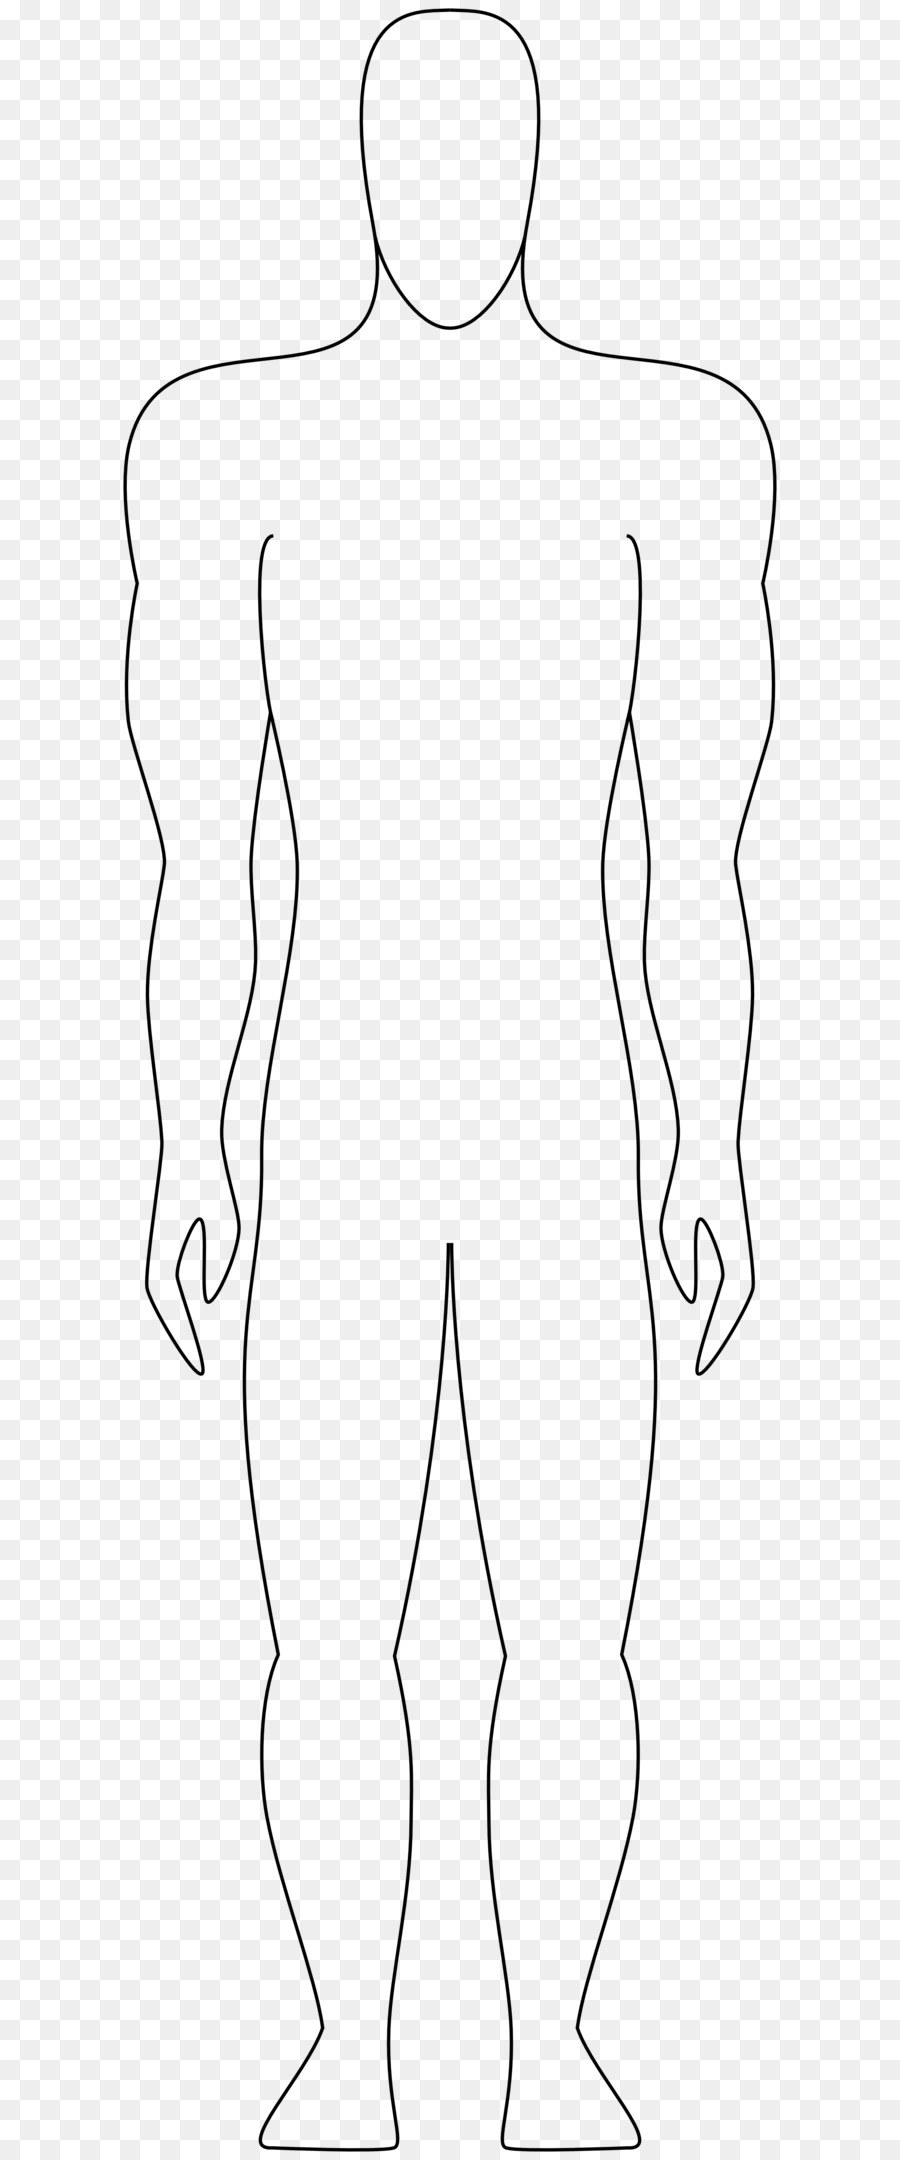 How To Draw A Person Body : Draw the base of the head by drawing a ...